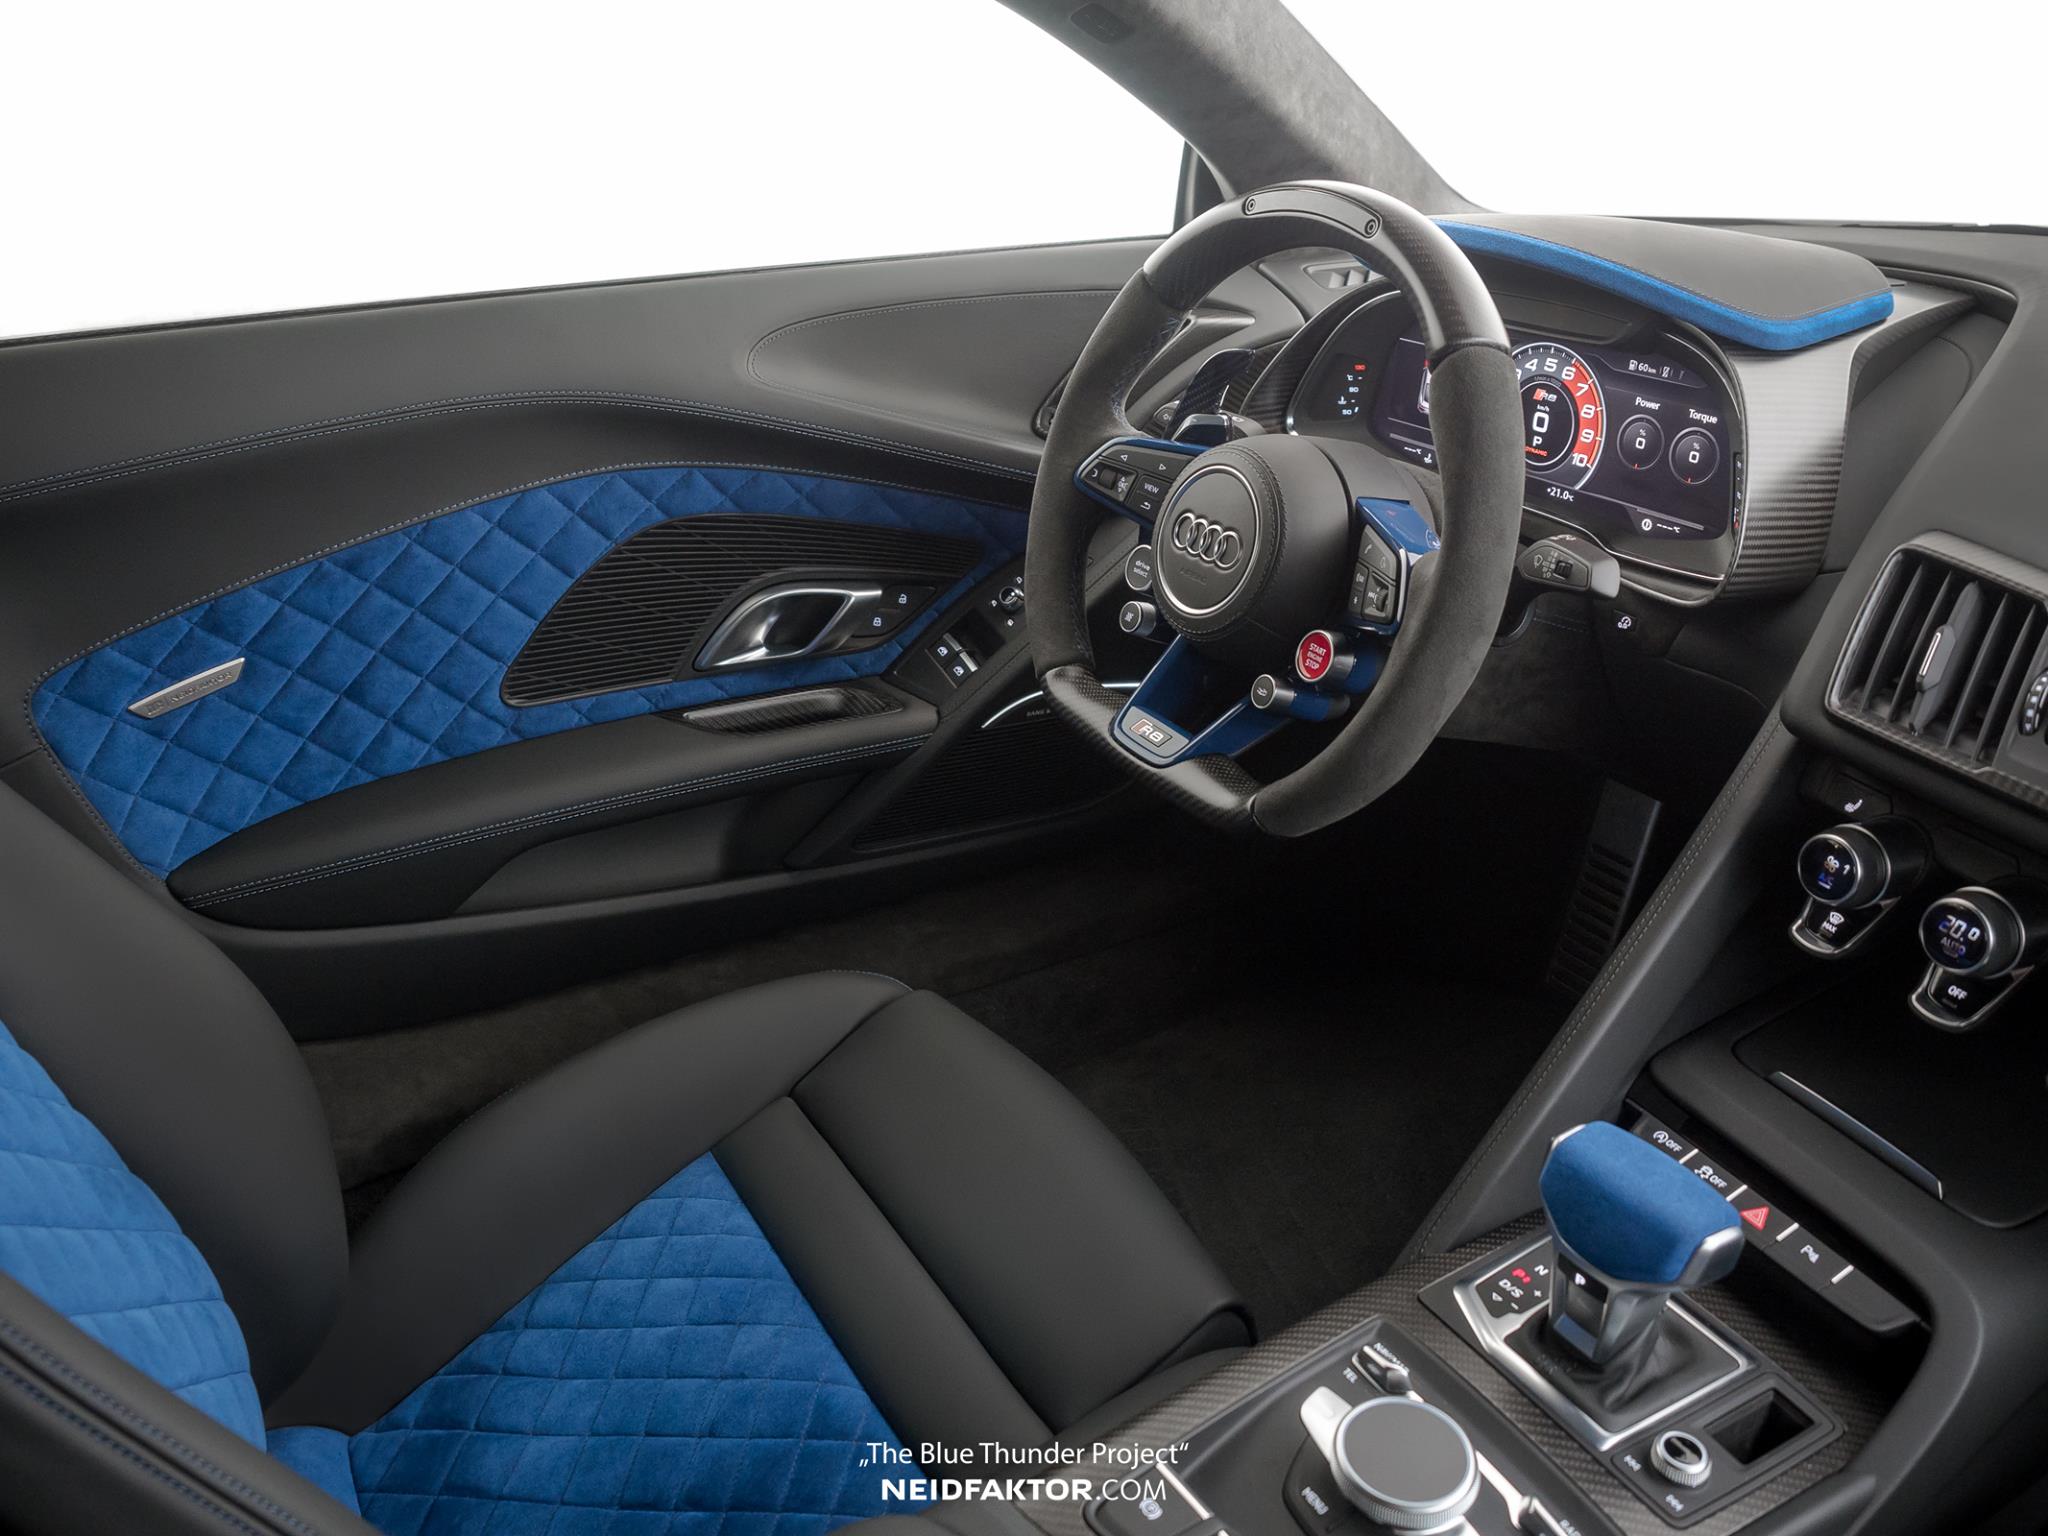 Audi S4 Customized With Leather Car Bra In Japan - autoevolution